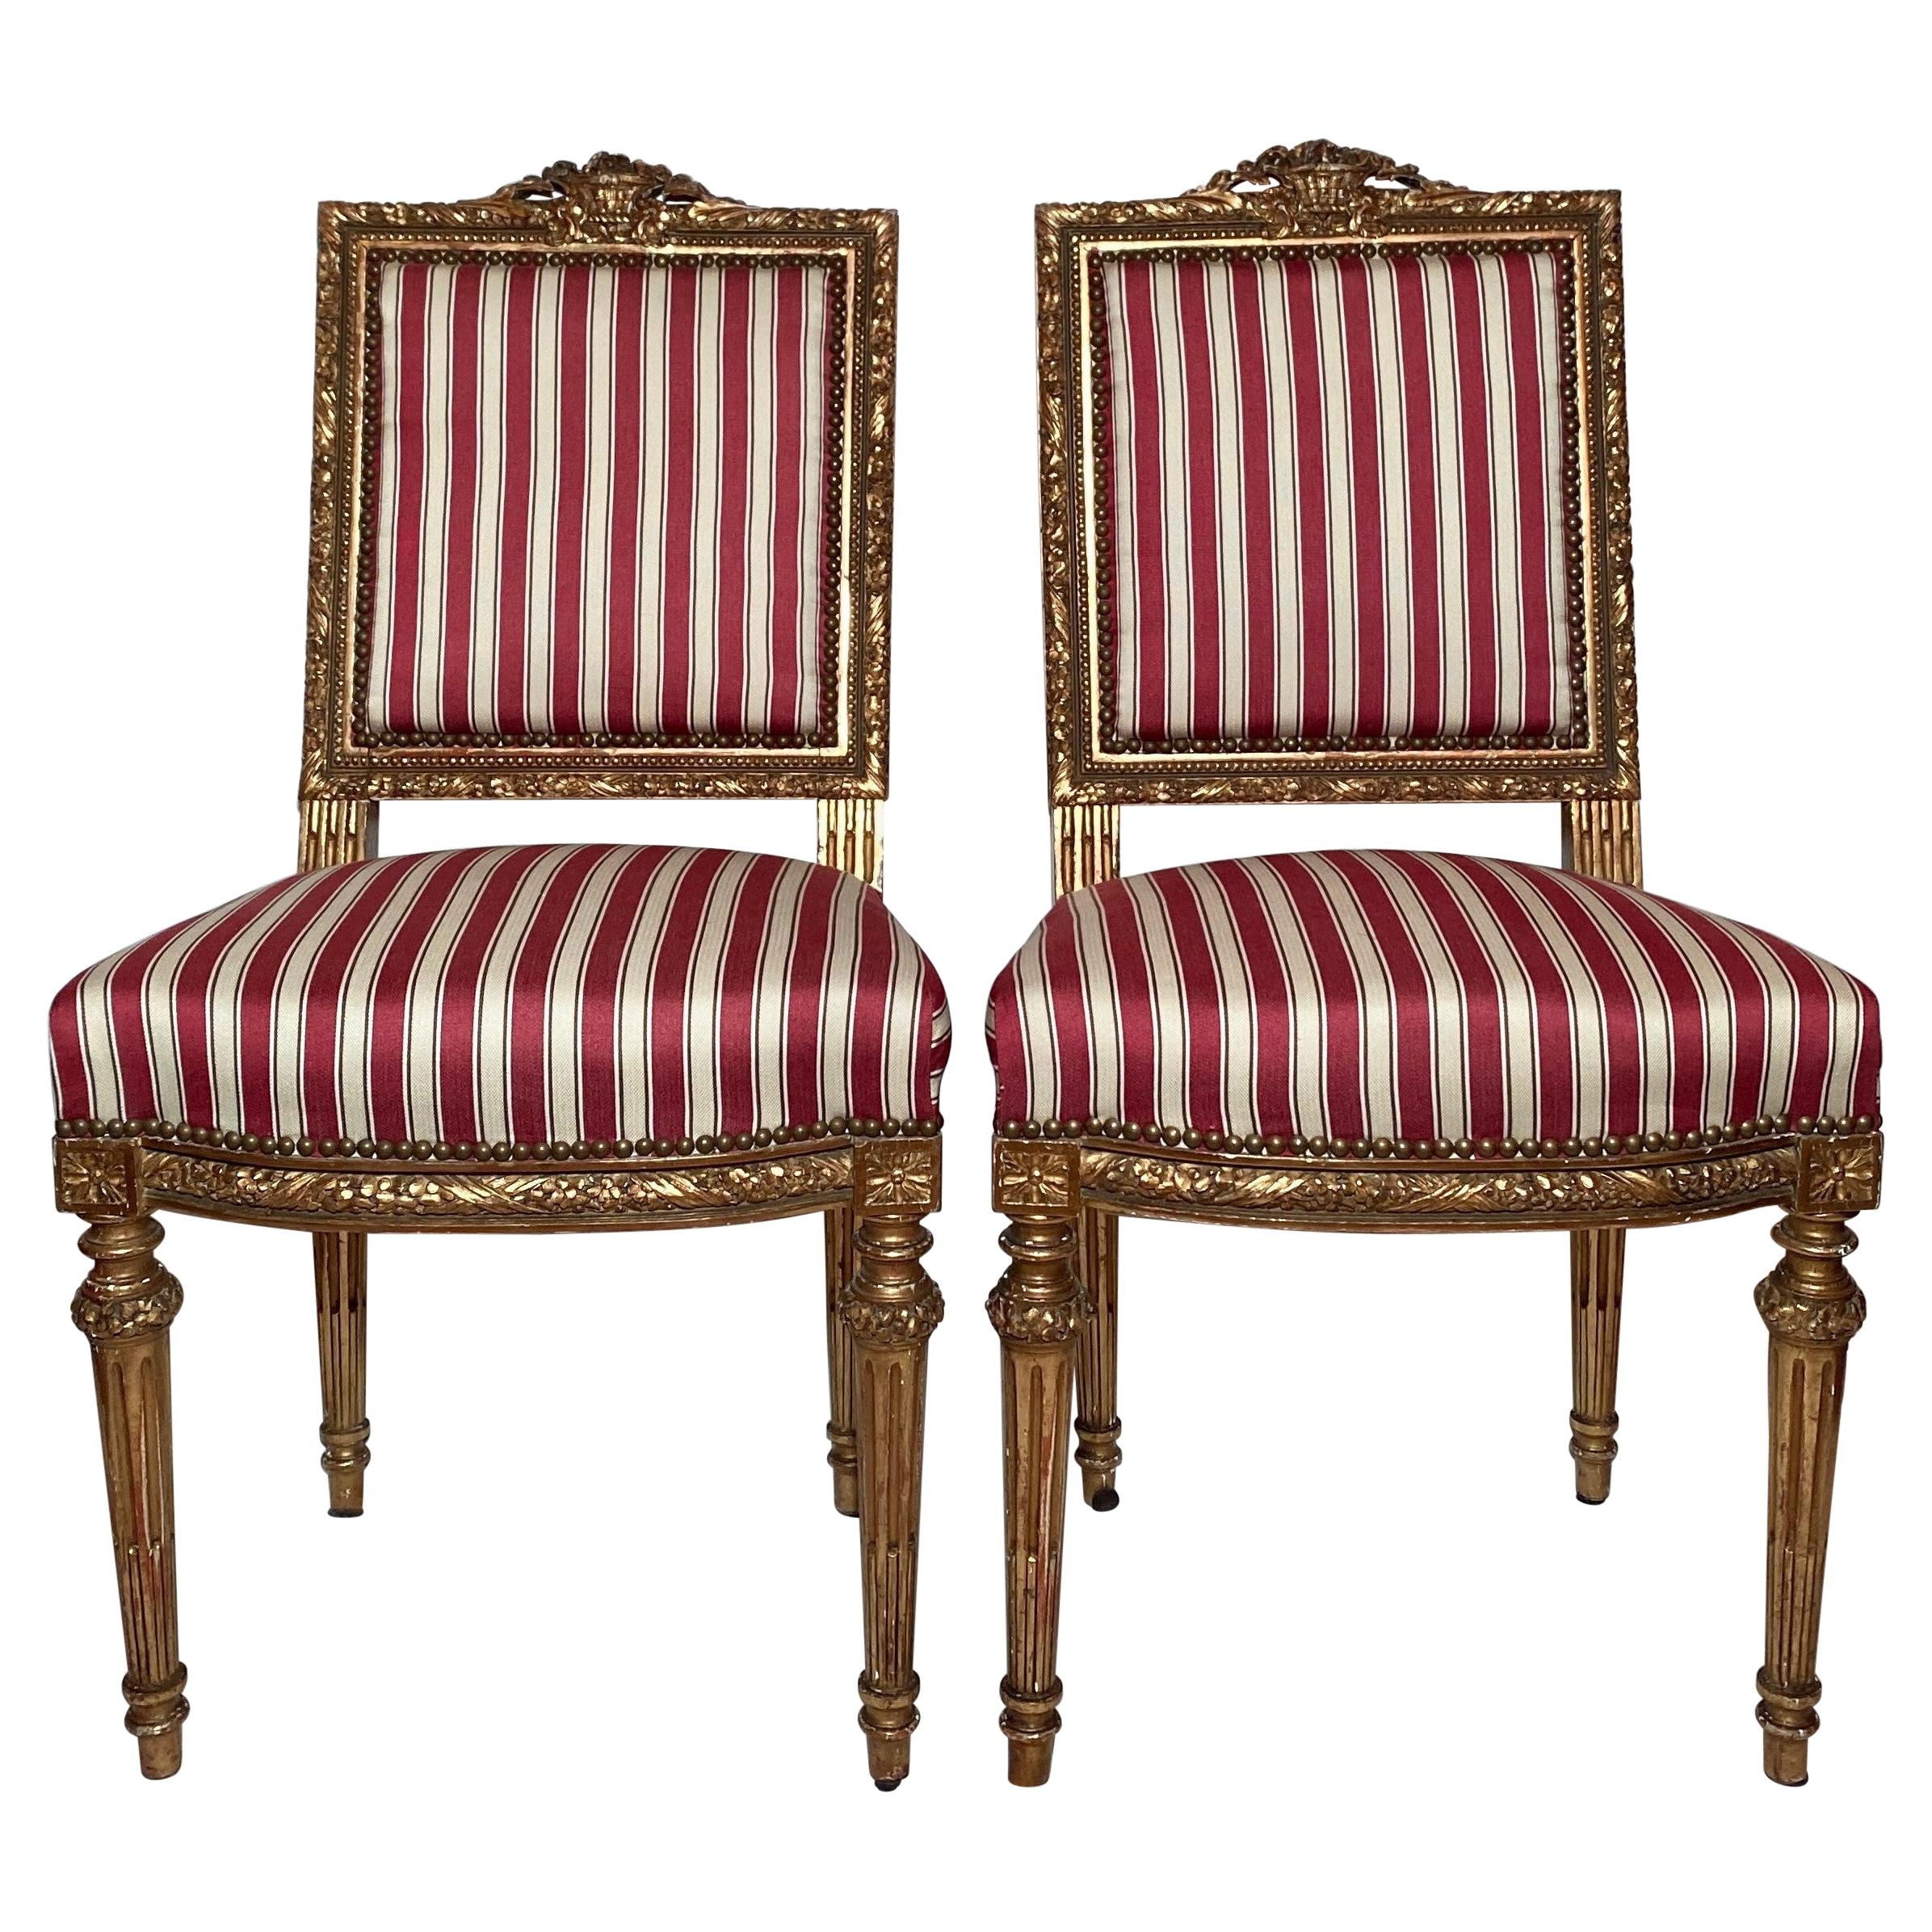 Pair Antique French 18th Century Louis XVI Side Chairs, Carved Wood with Gold